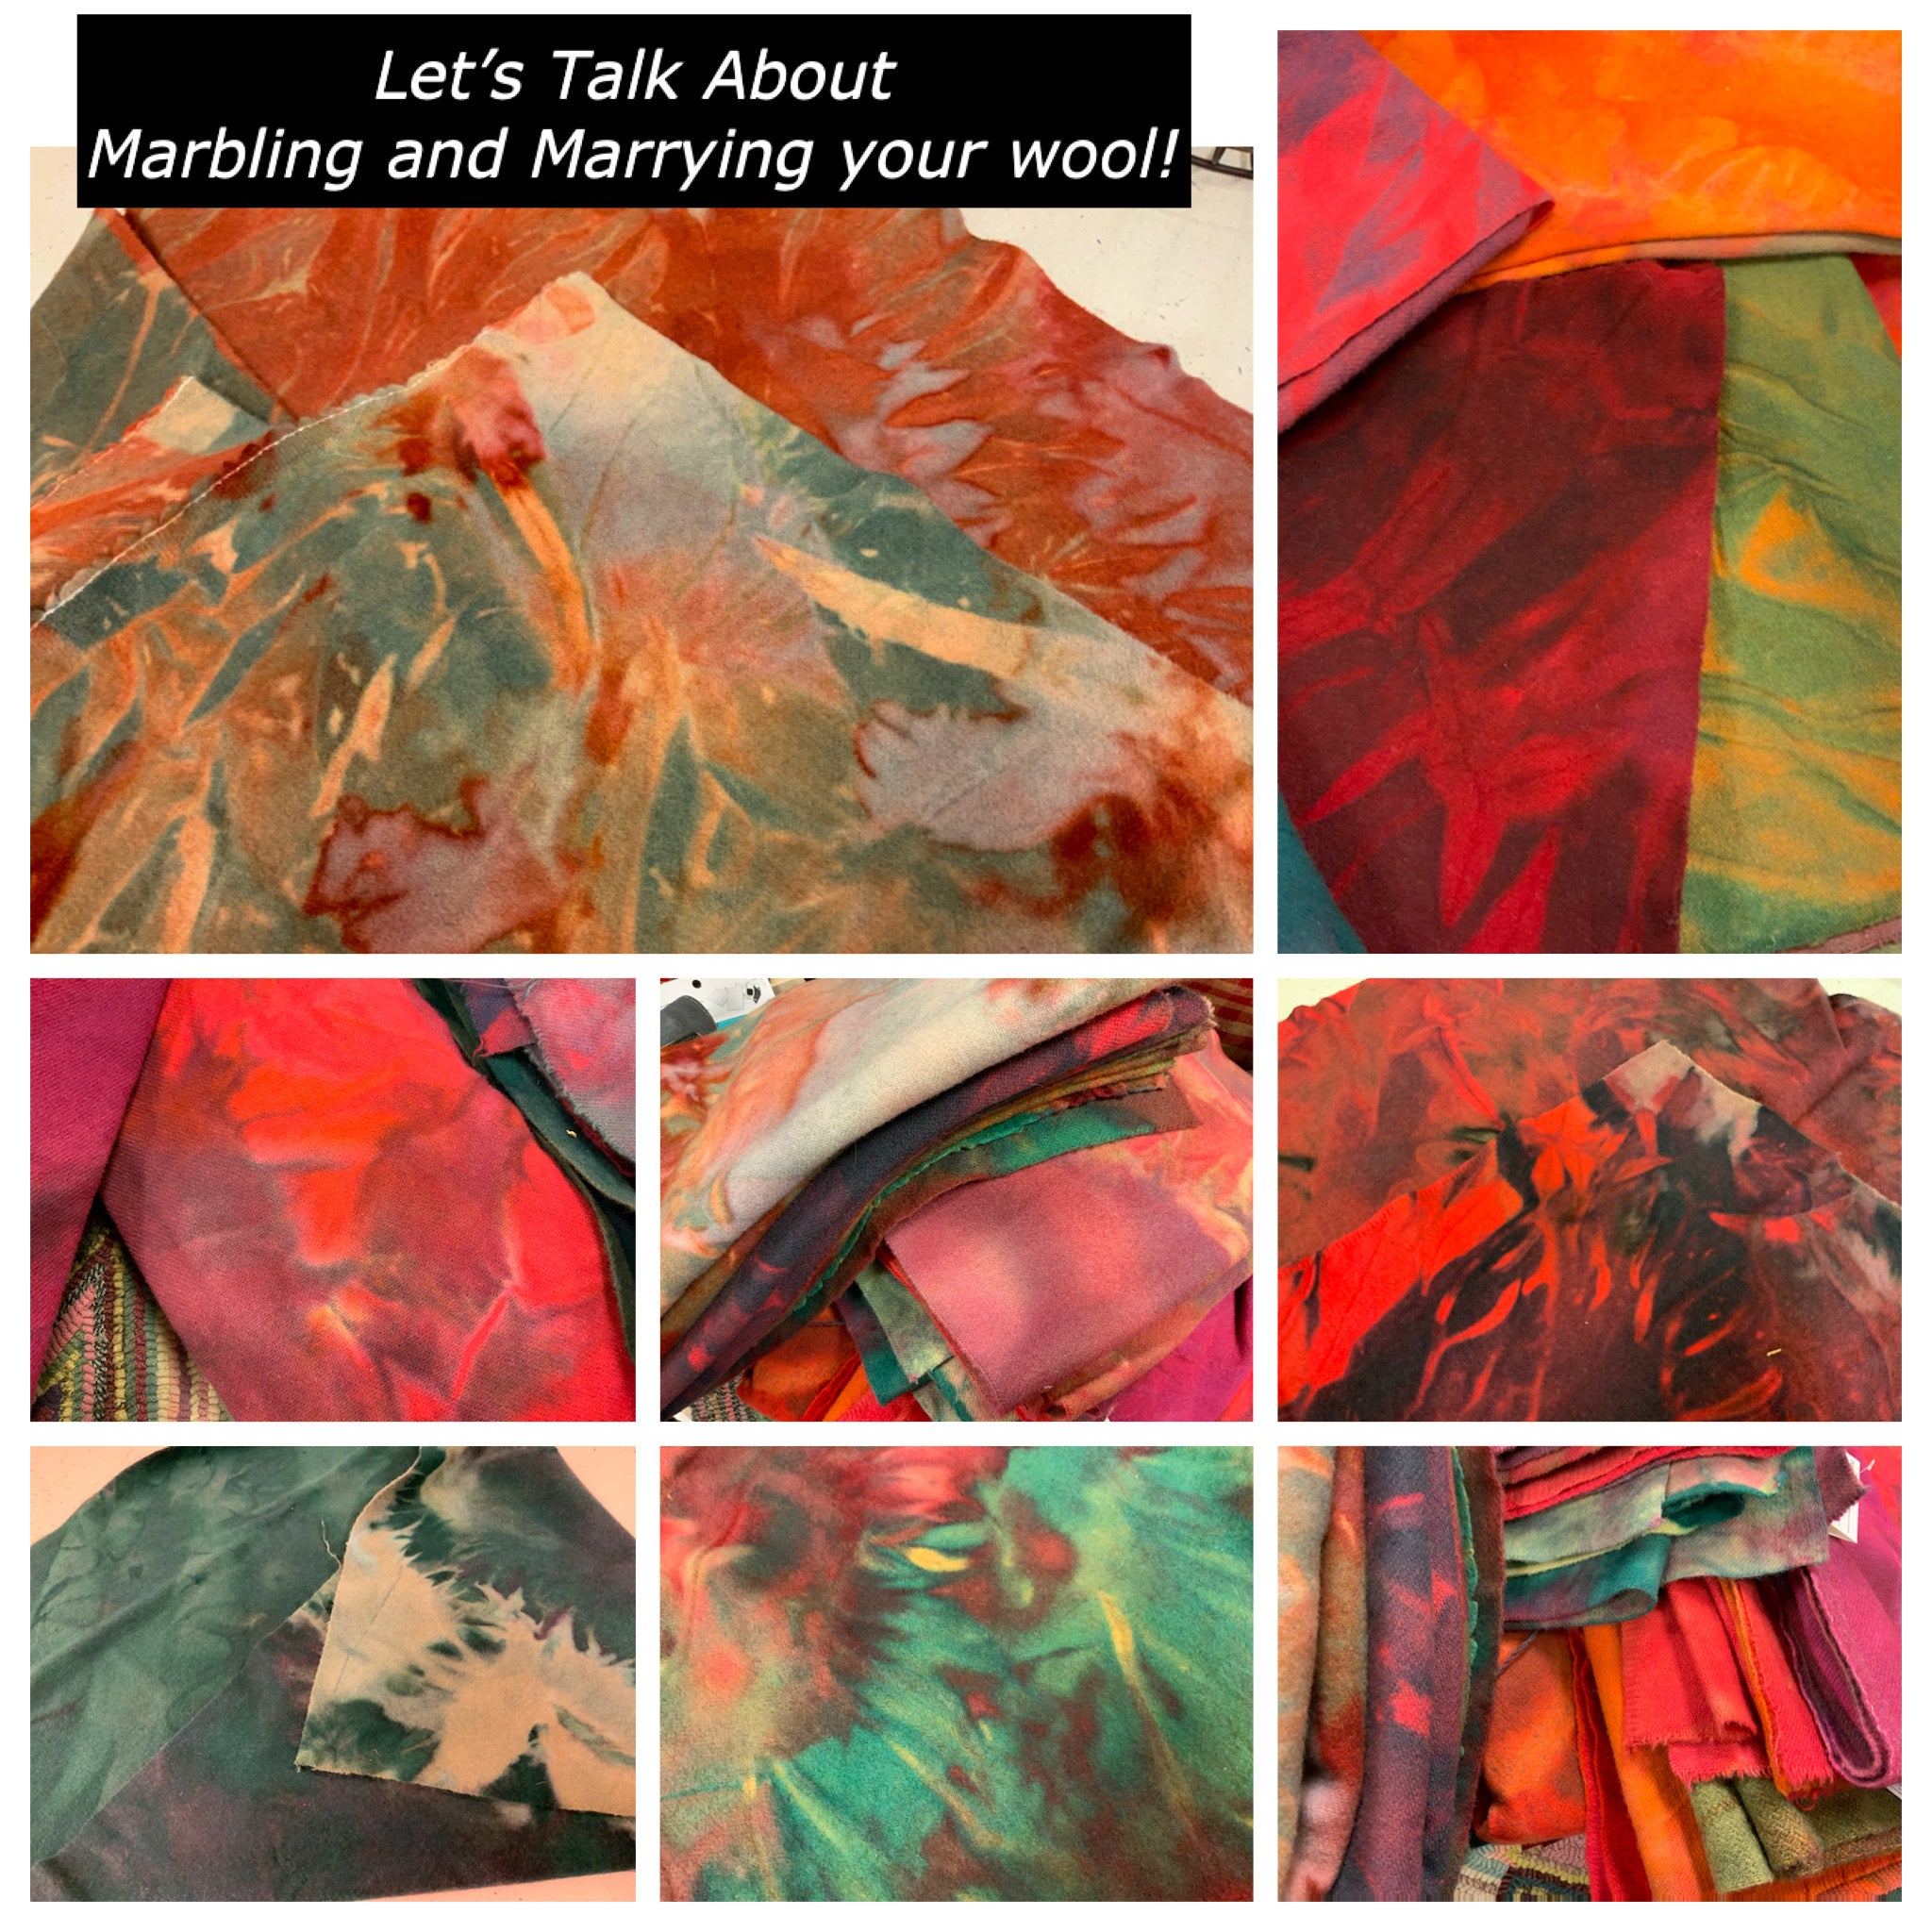 Let's Talk about Marbling and Marrying!